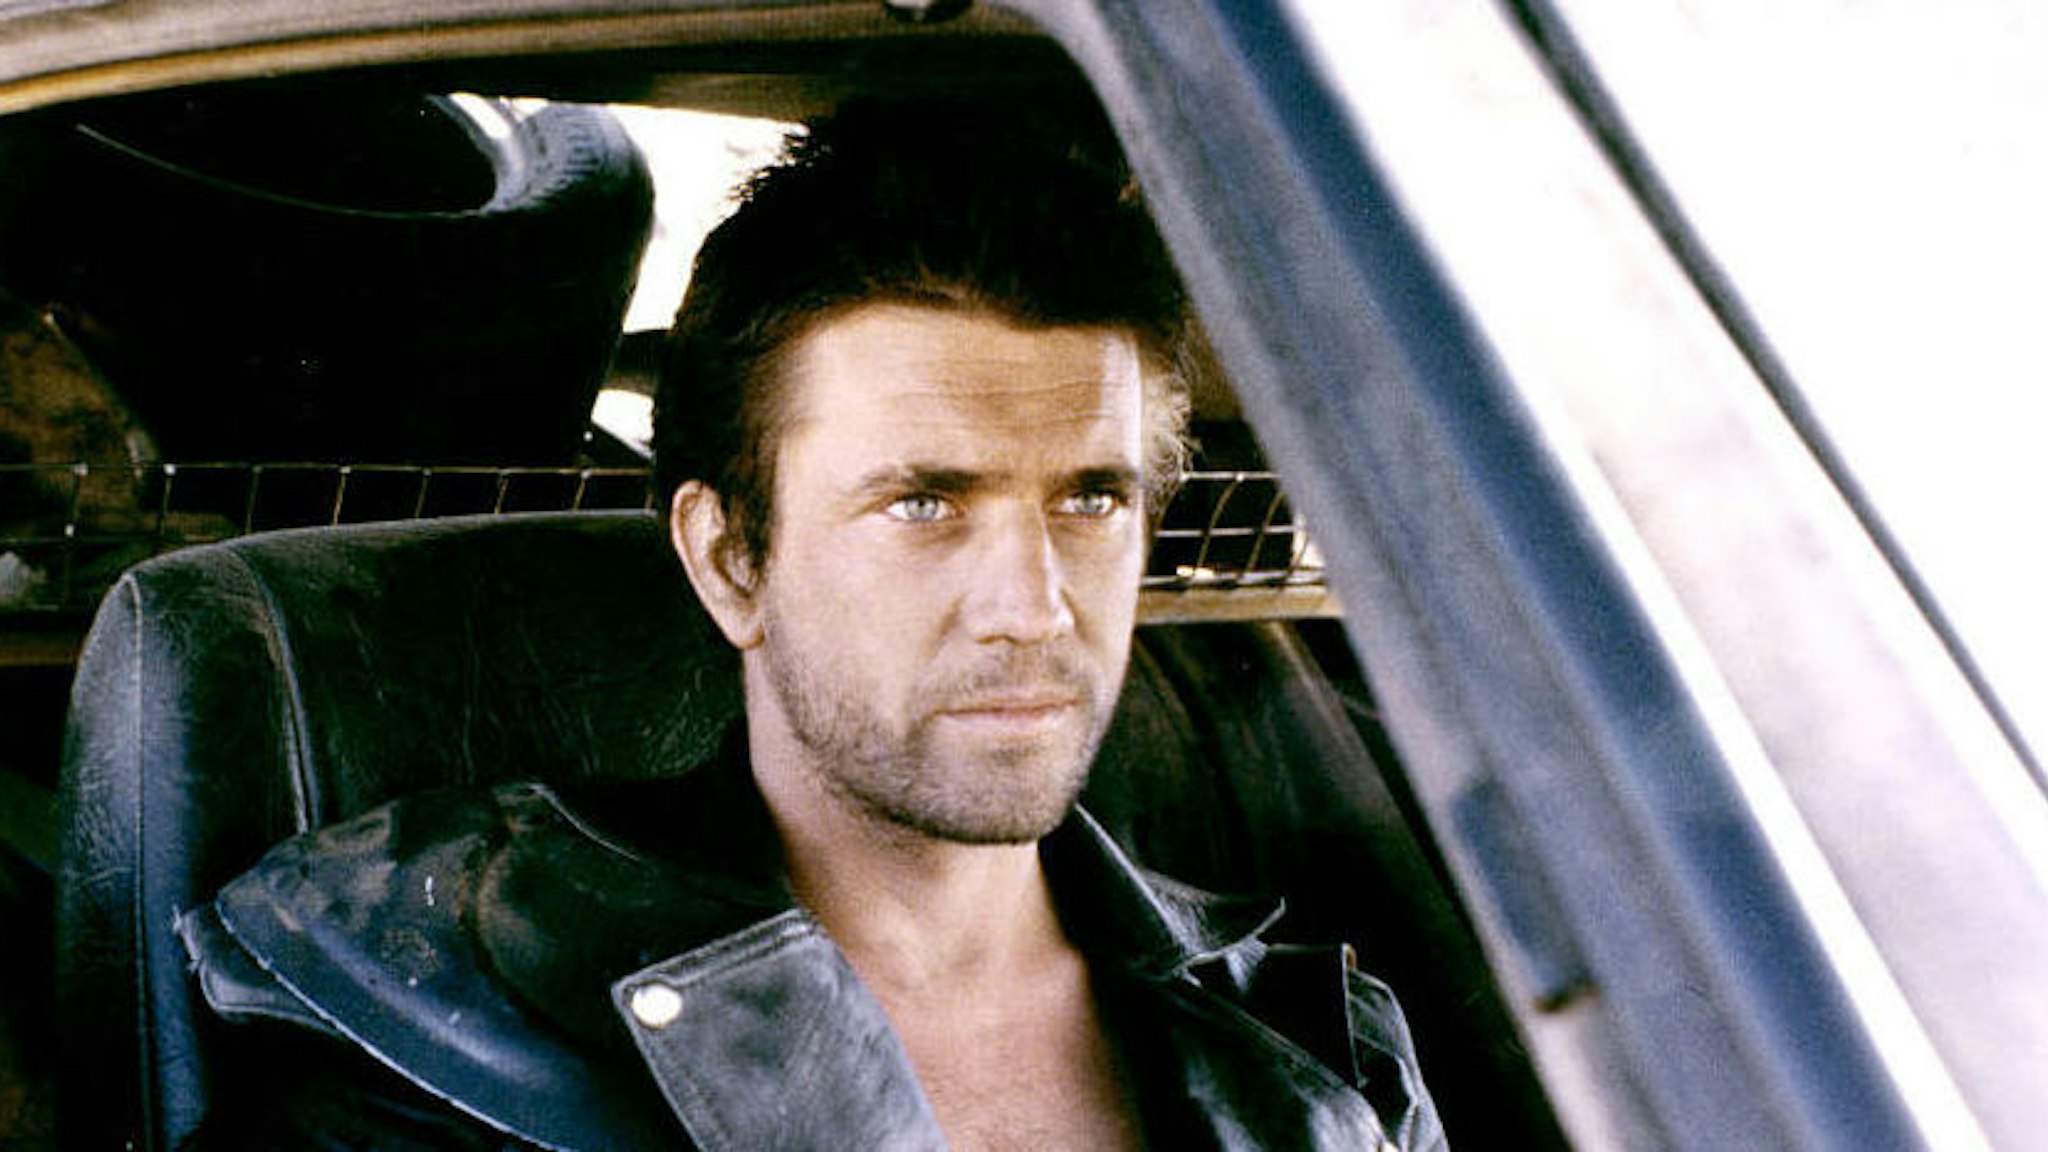 American actor Mel Gibson on the set of Mad Max 2: The Road Warrior written and directed by George Miller. (Photo by Sunset Boulevard/Corbis via Getty Images)